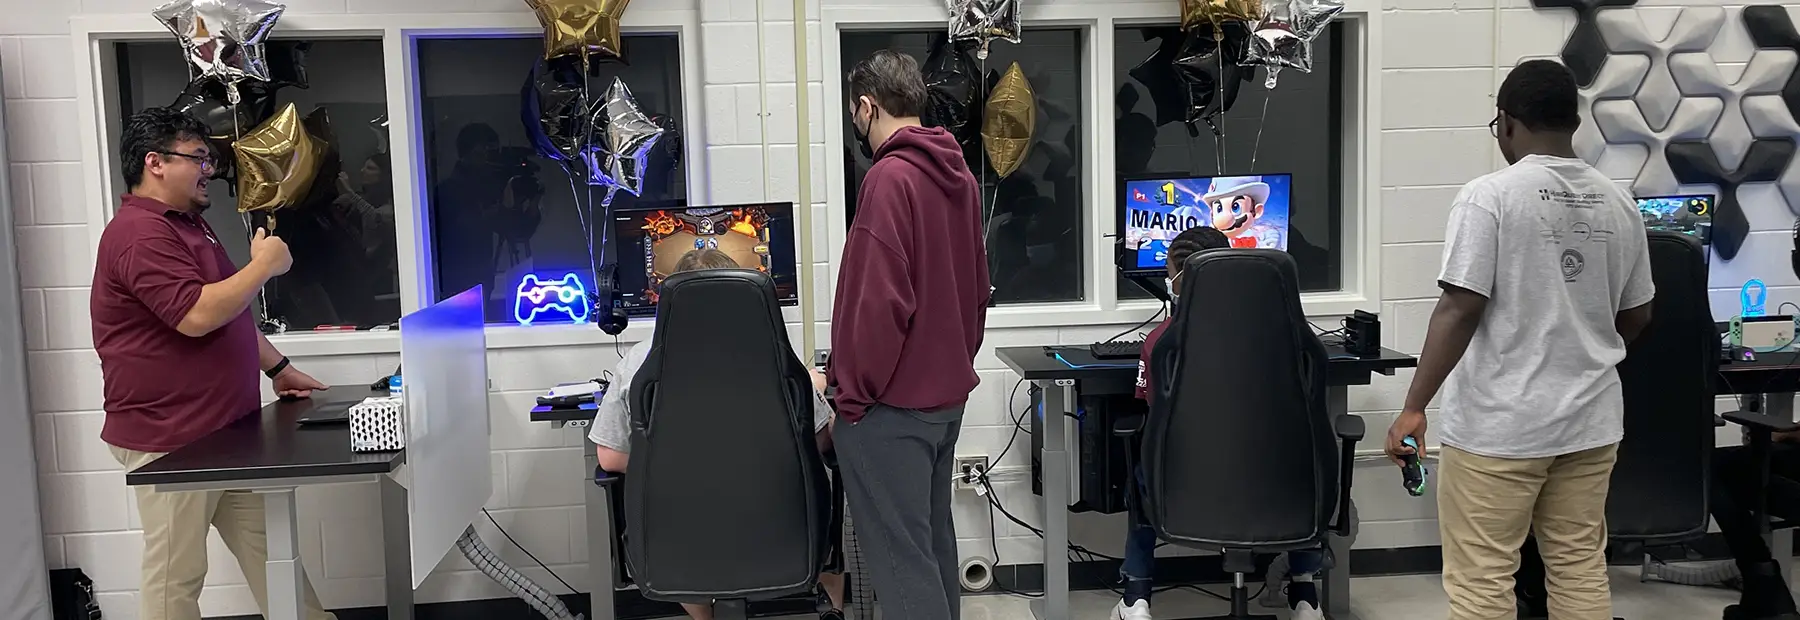 Students at multiple gaming workstations